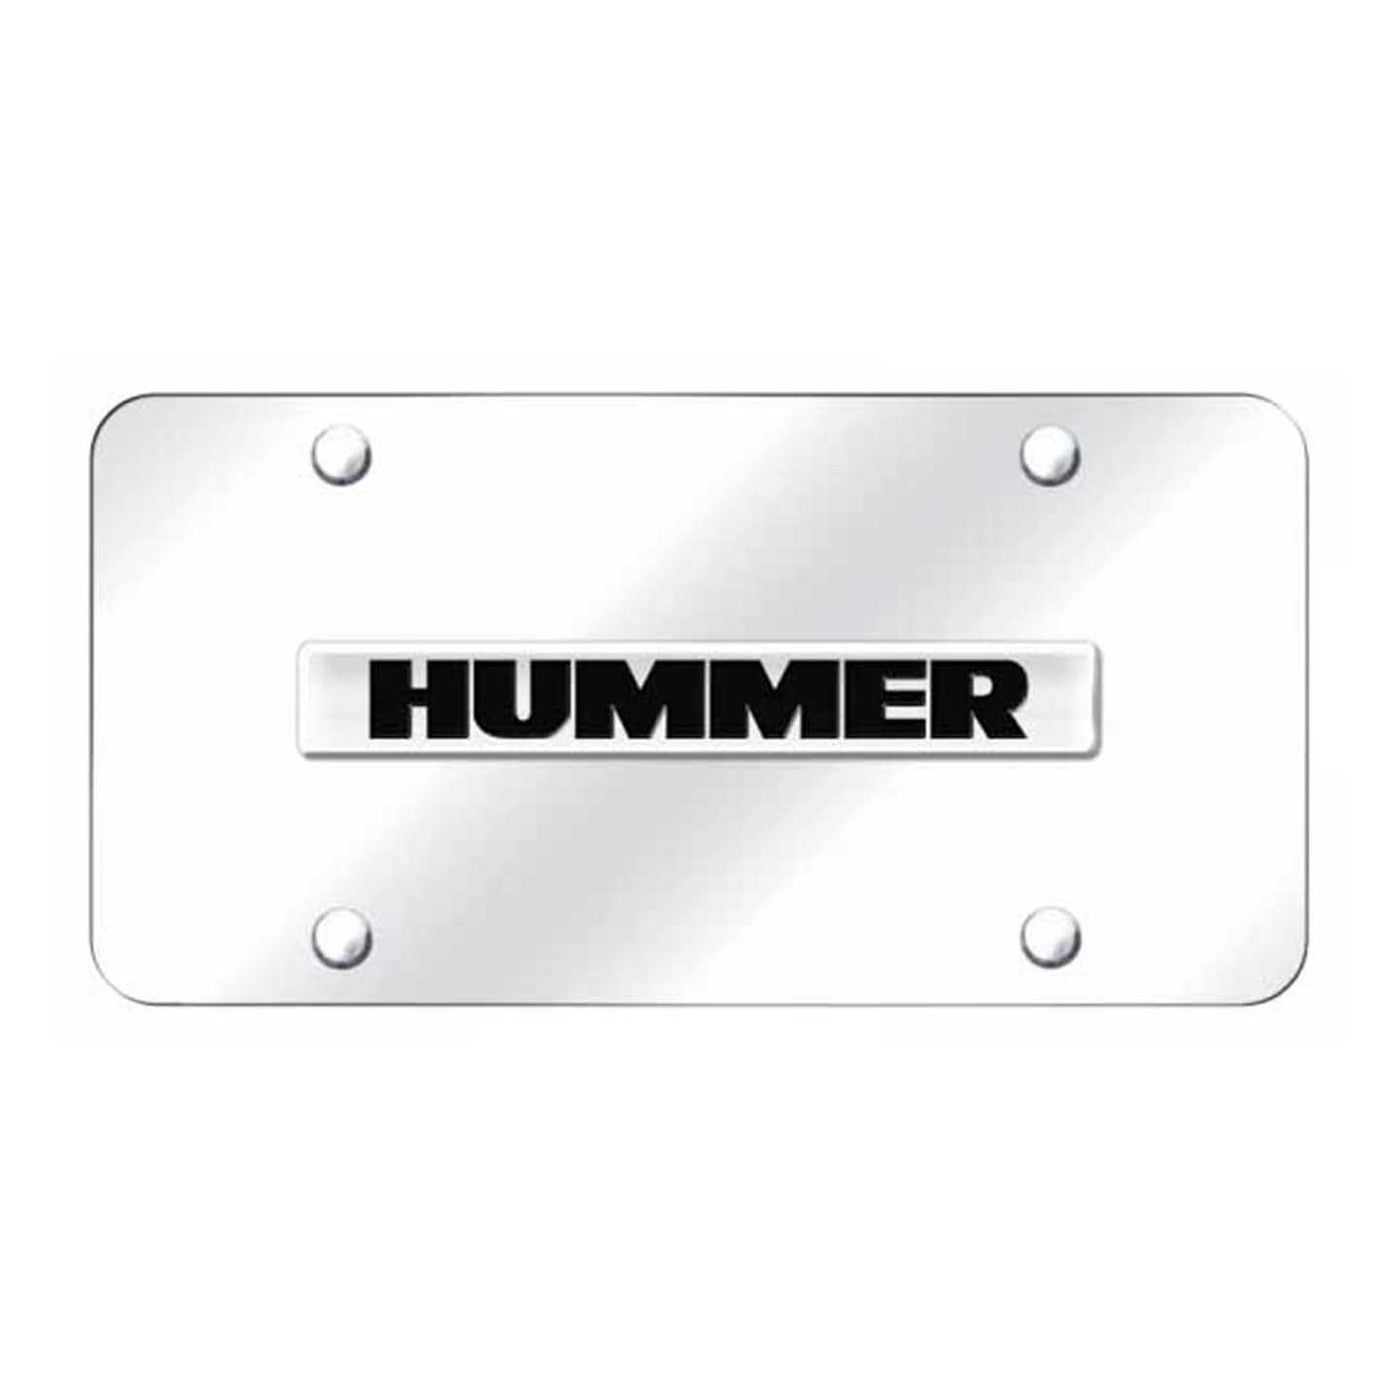 Hummer Name License Plate - Chrome on Mirrored